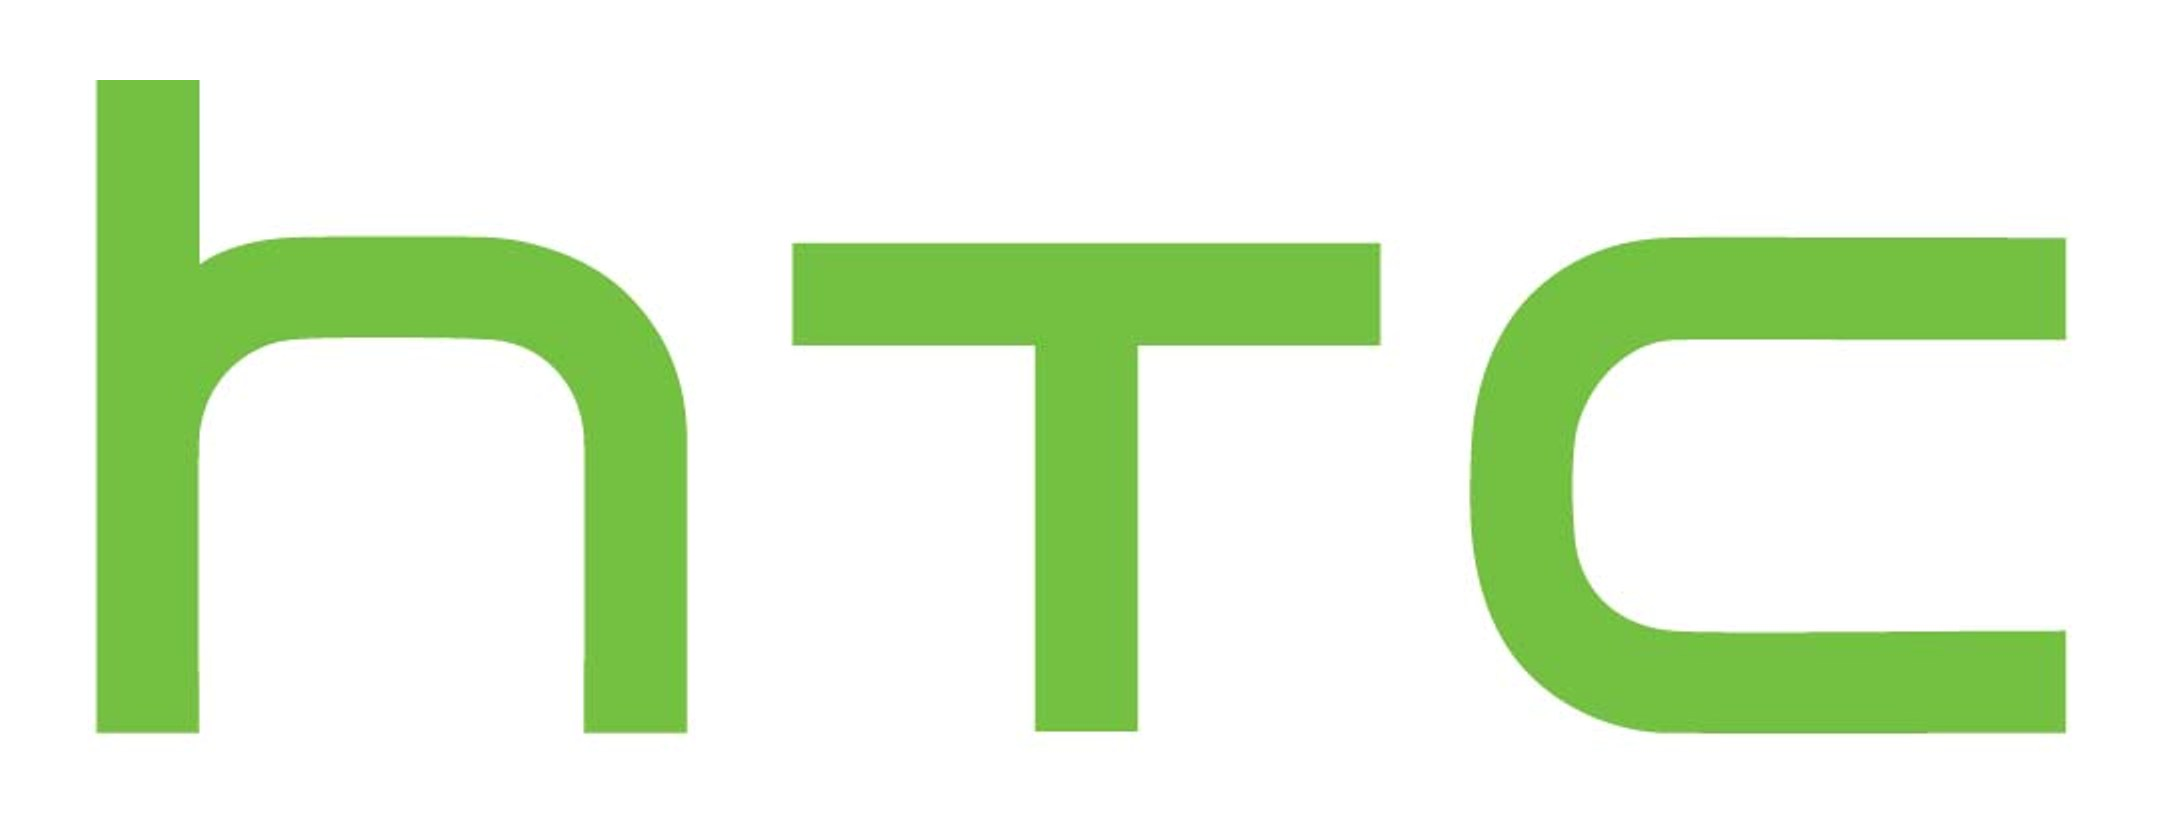 HTC's Revenue in 2015 Decreased by 35%